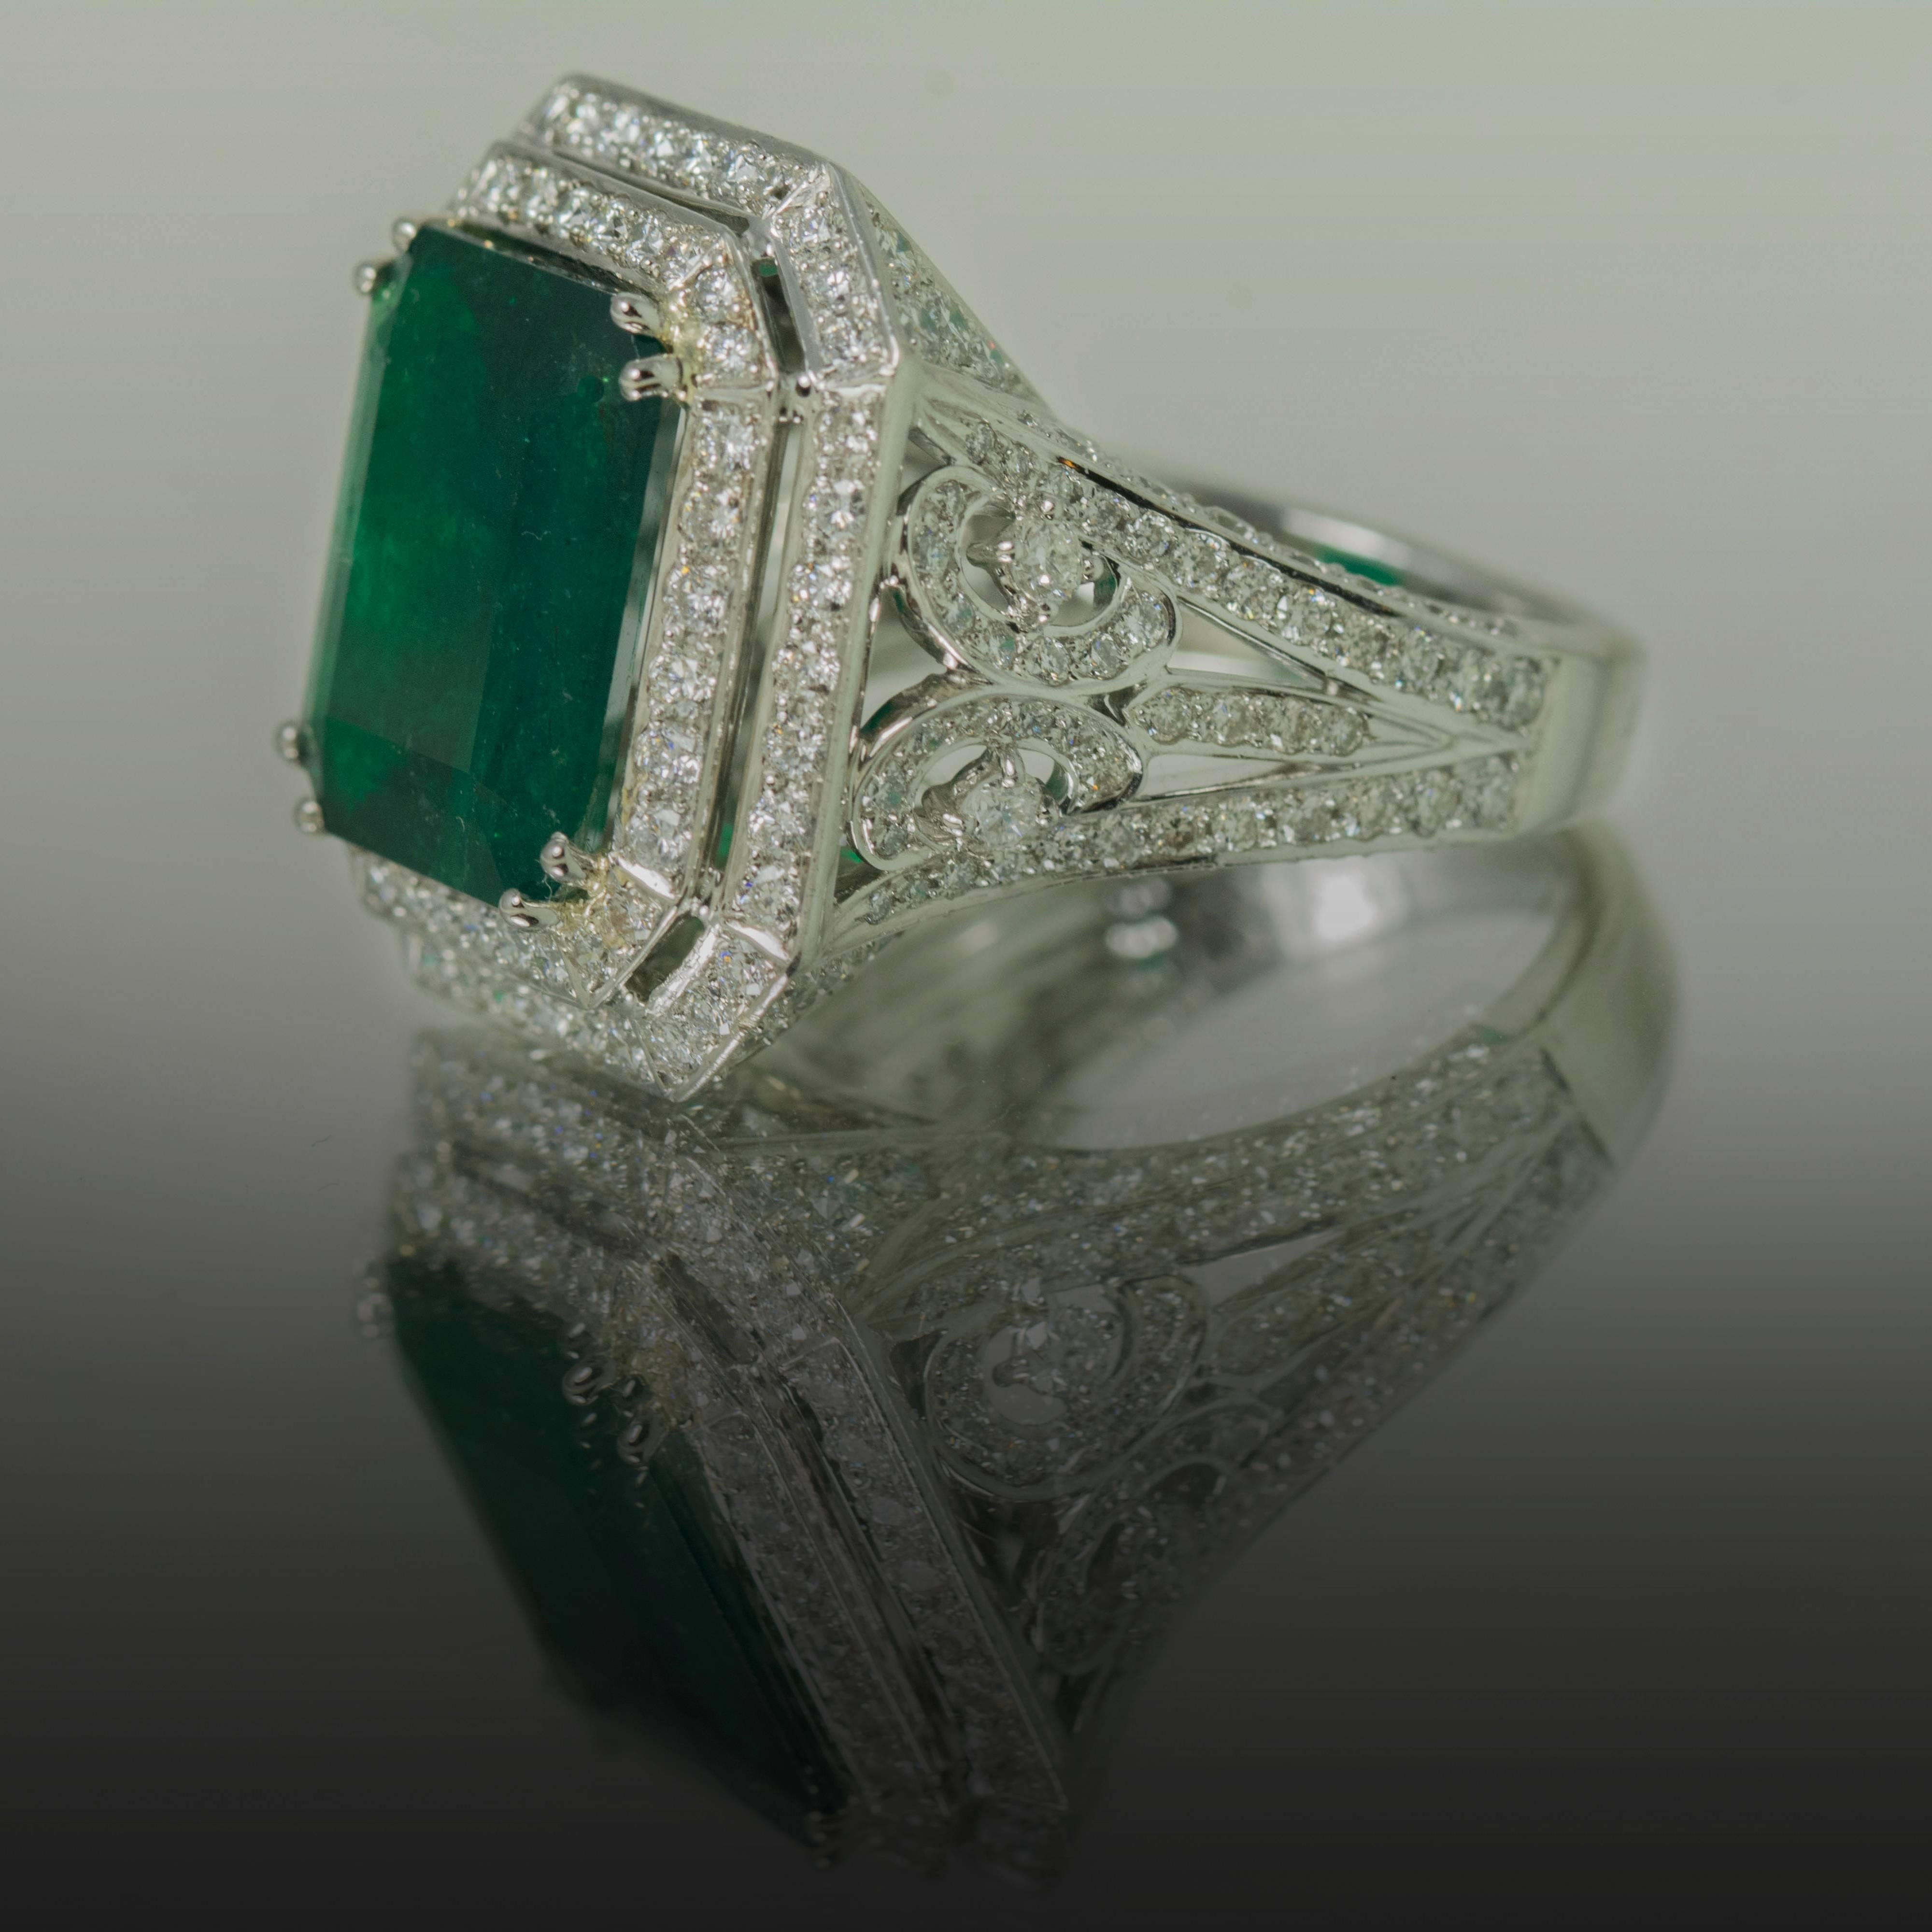 Platinum Ring with 1 Emerald Weighing 6.81 Carats along with 4.71 Carats of Diamonds. Emerald is Gubelin and C. Dunaigre Certified. We Offer Complementary Sizing with every Purchase.  